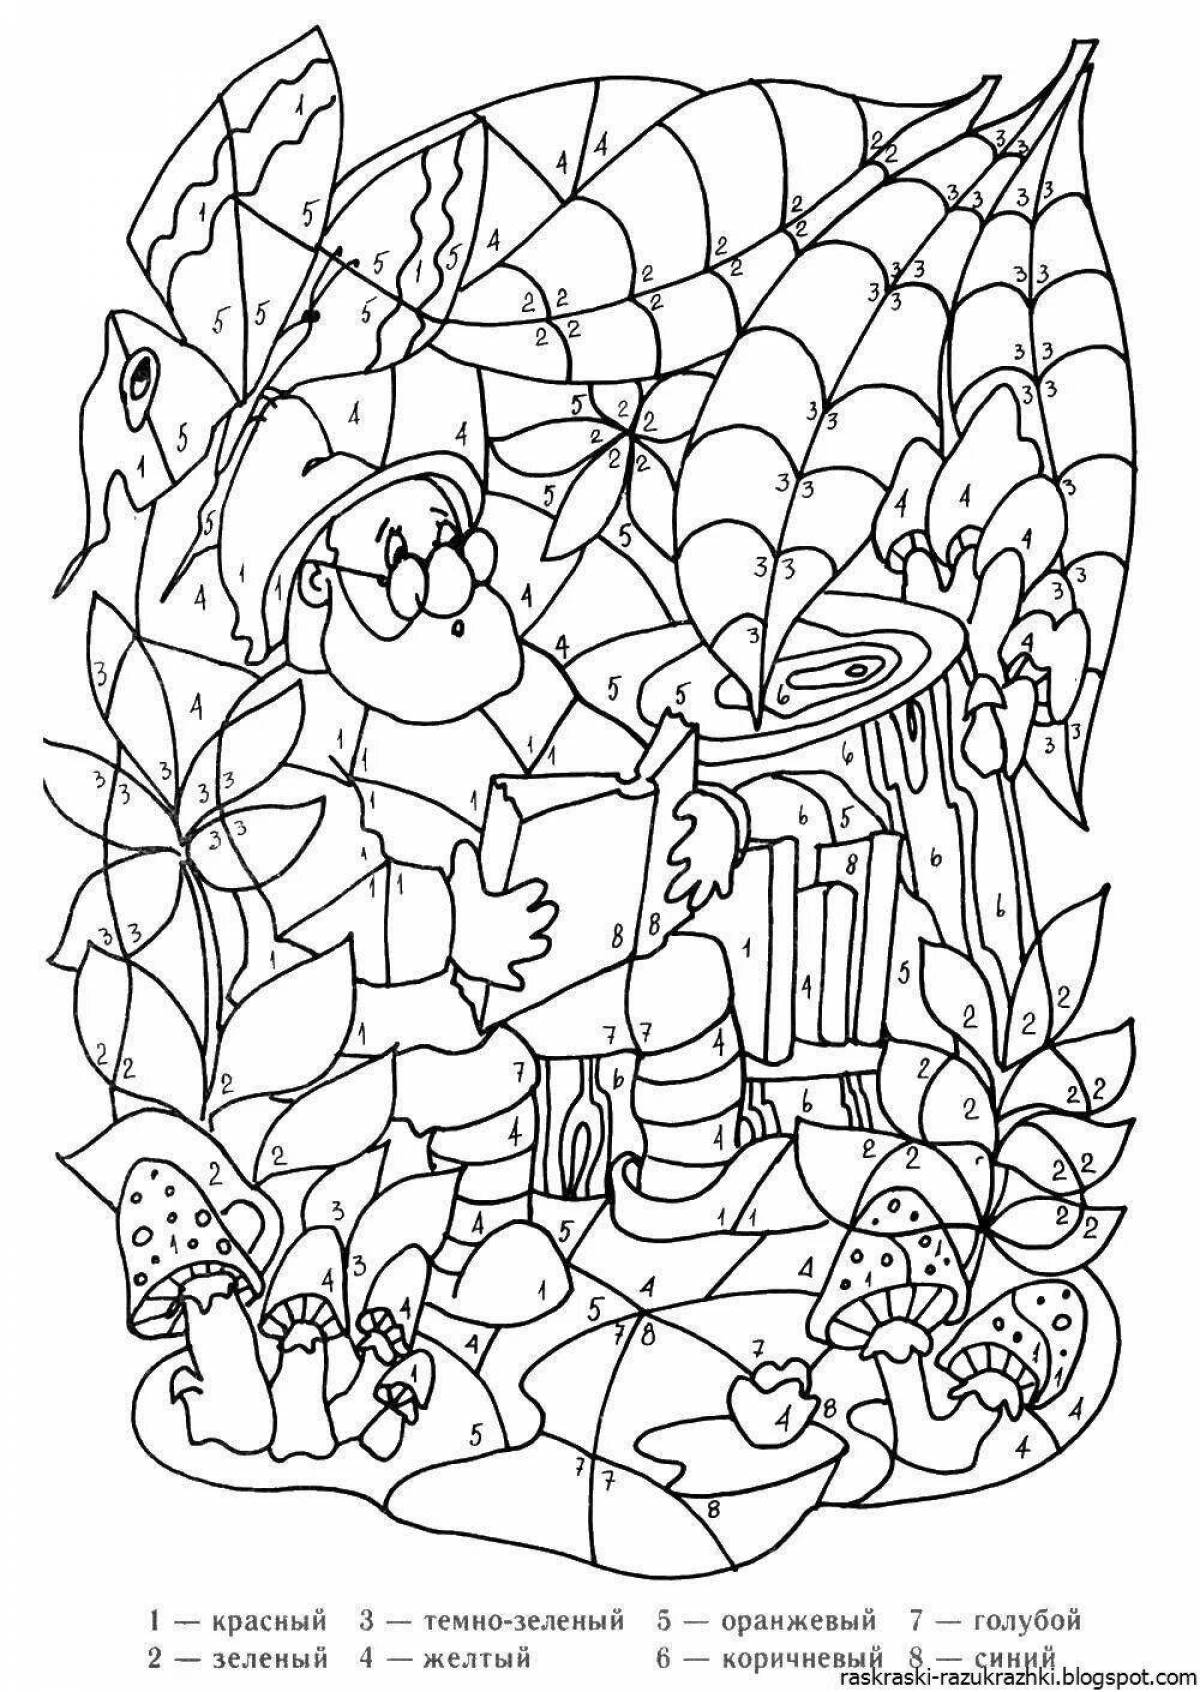 Exotic fancy coloring book for kids